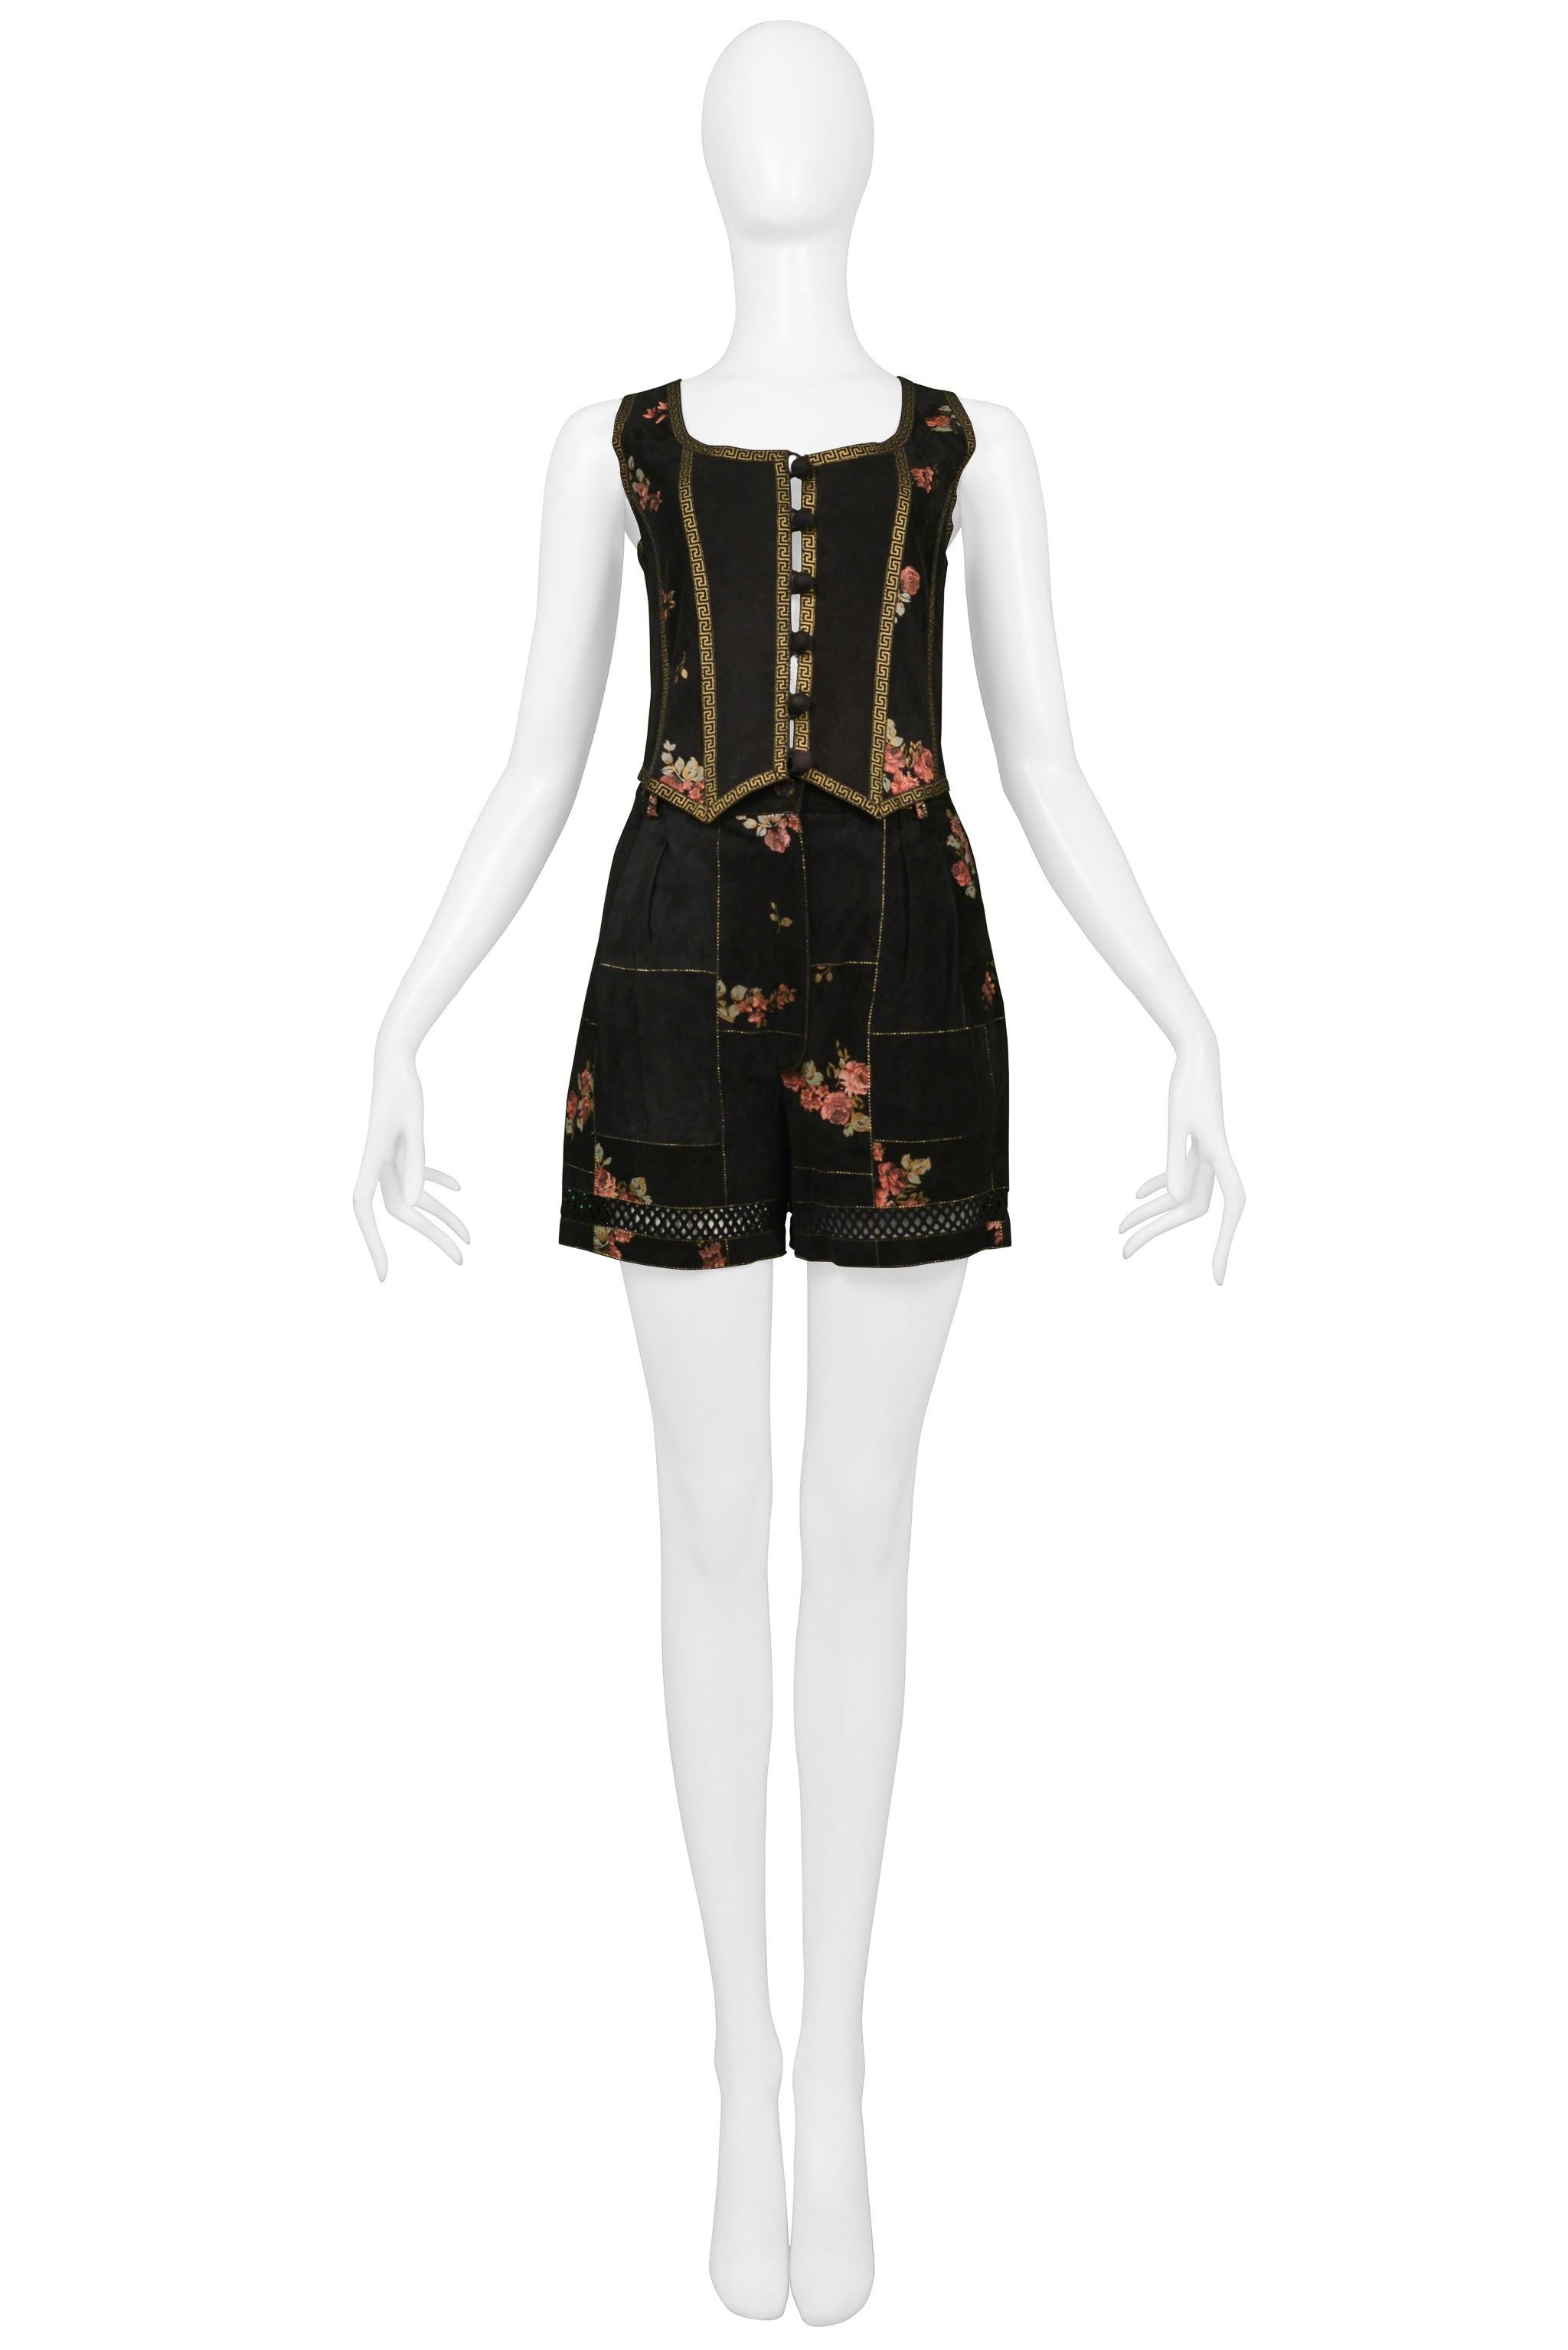 Resurrection Vintage is excited to present a vintage Roberto Cavalli black floral suede 2 piece set featuring a button top and shorts with gold trim detailing, floral pattern, and lattice cut out detailing. 

Roberto Cavalli
Size: S
Suede 
Excellent